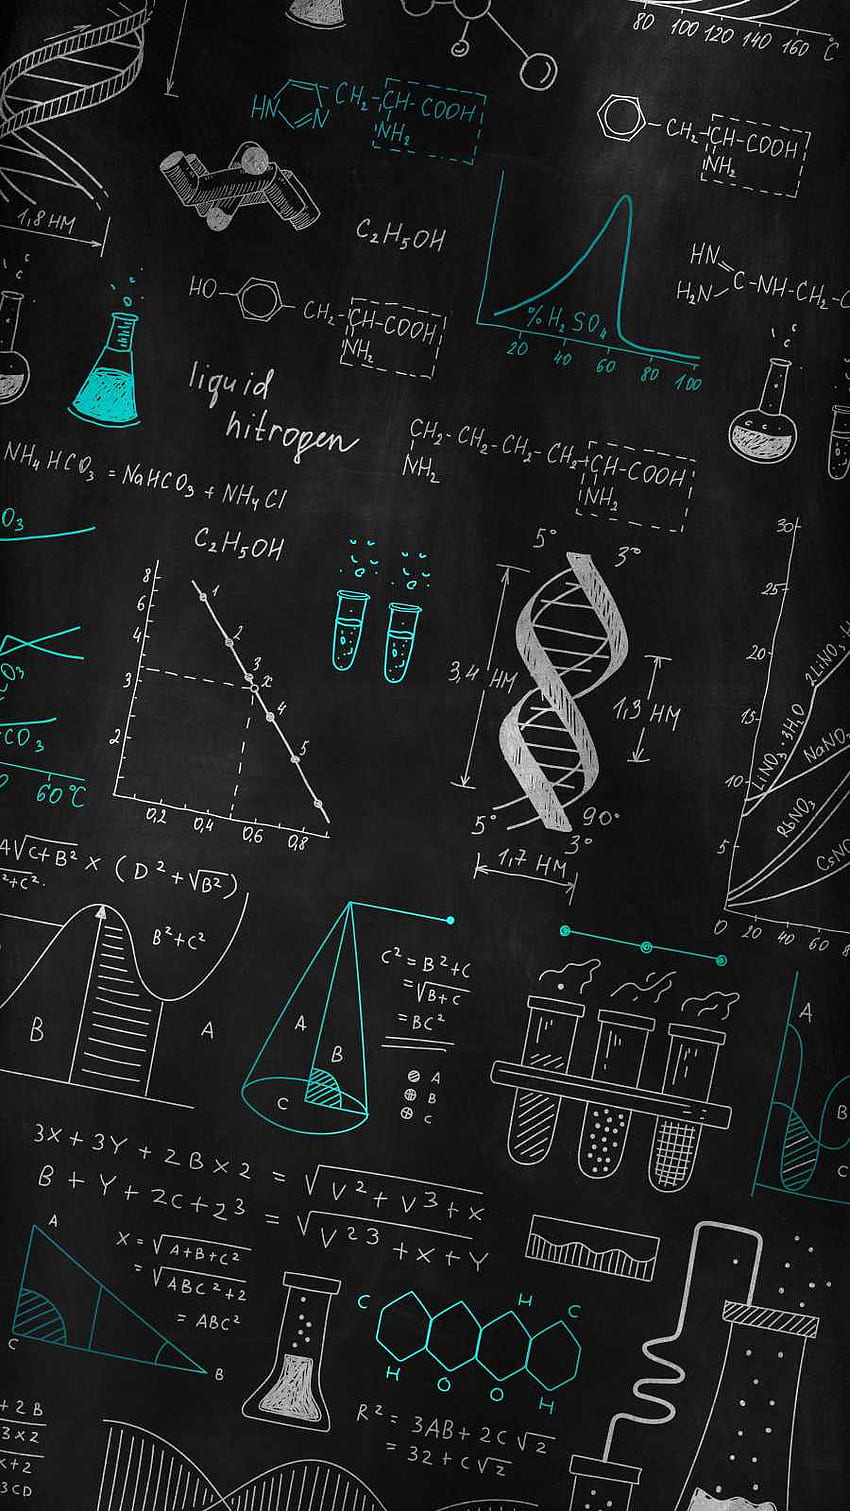 IPhone wallpaper with science drawings on a blackboard - Chemistry, science